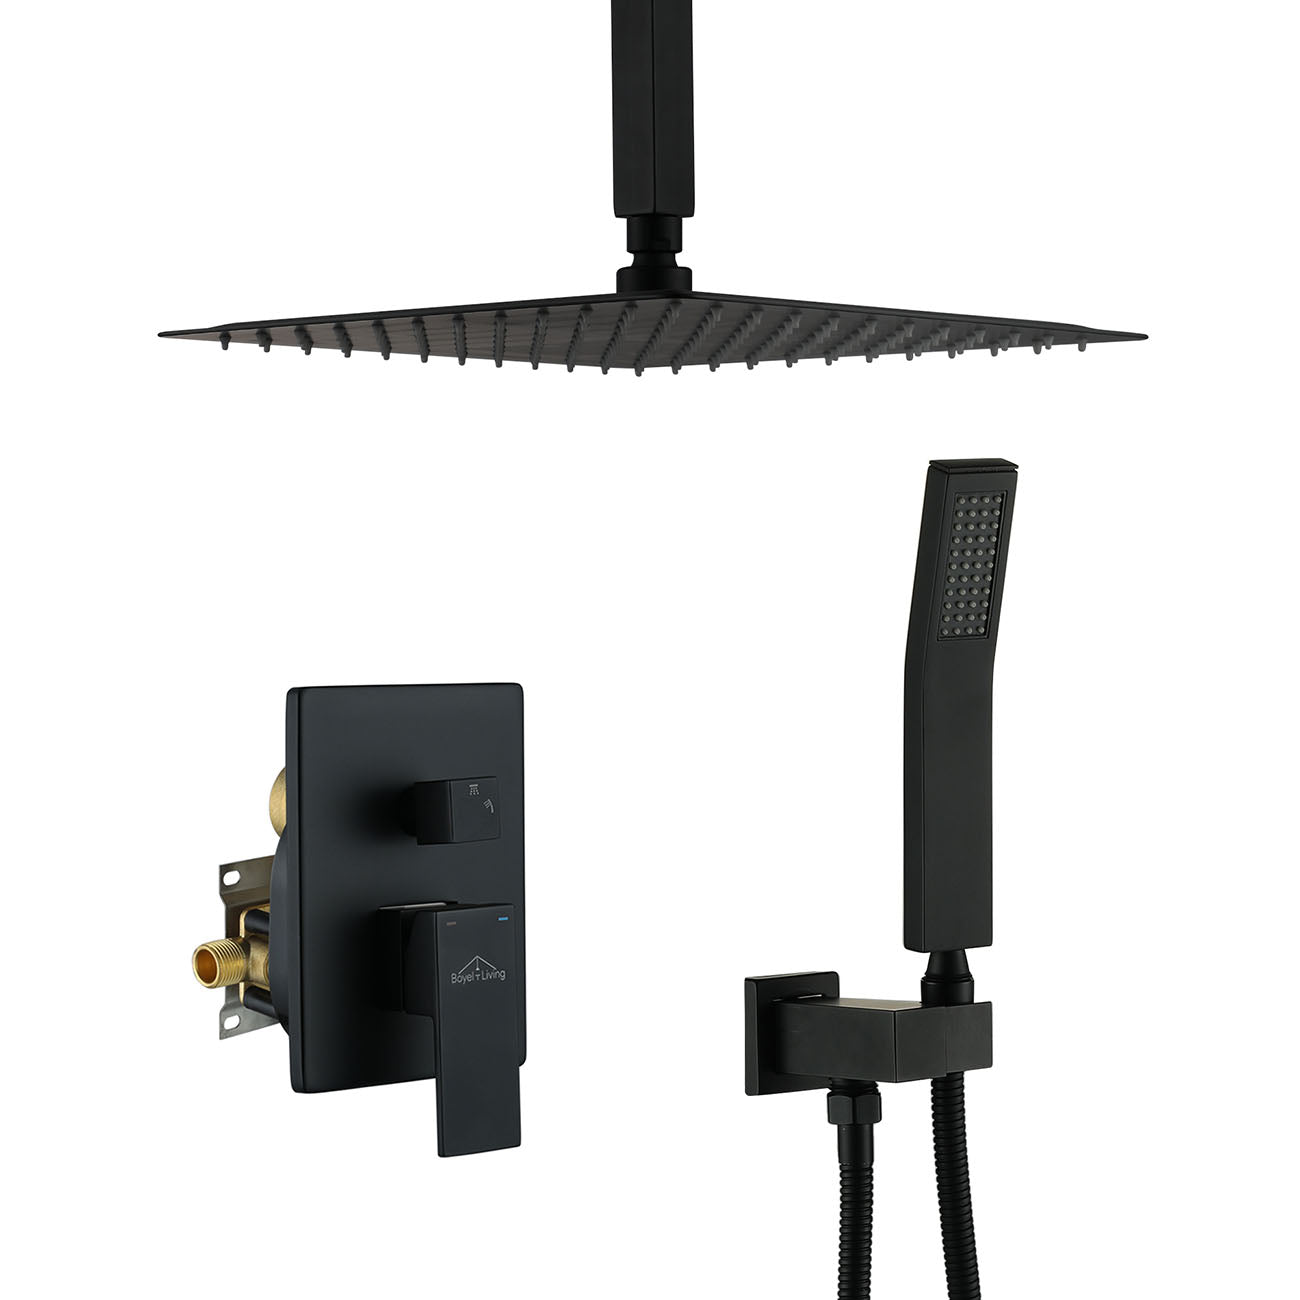 Boyel Living 12 in. Square Rainfall Ceiling Mounted Shower System with Handheld Shower Head, Matte Black